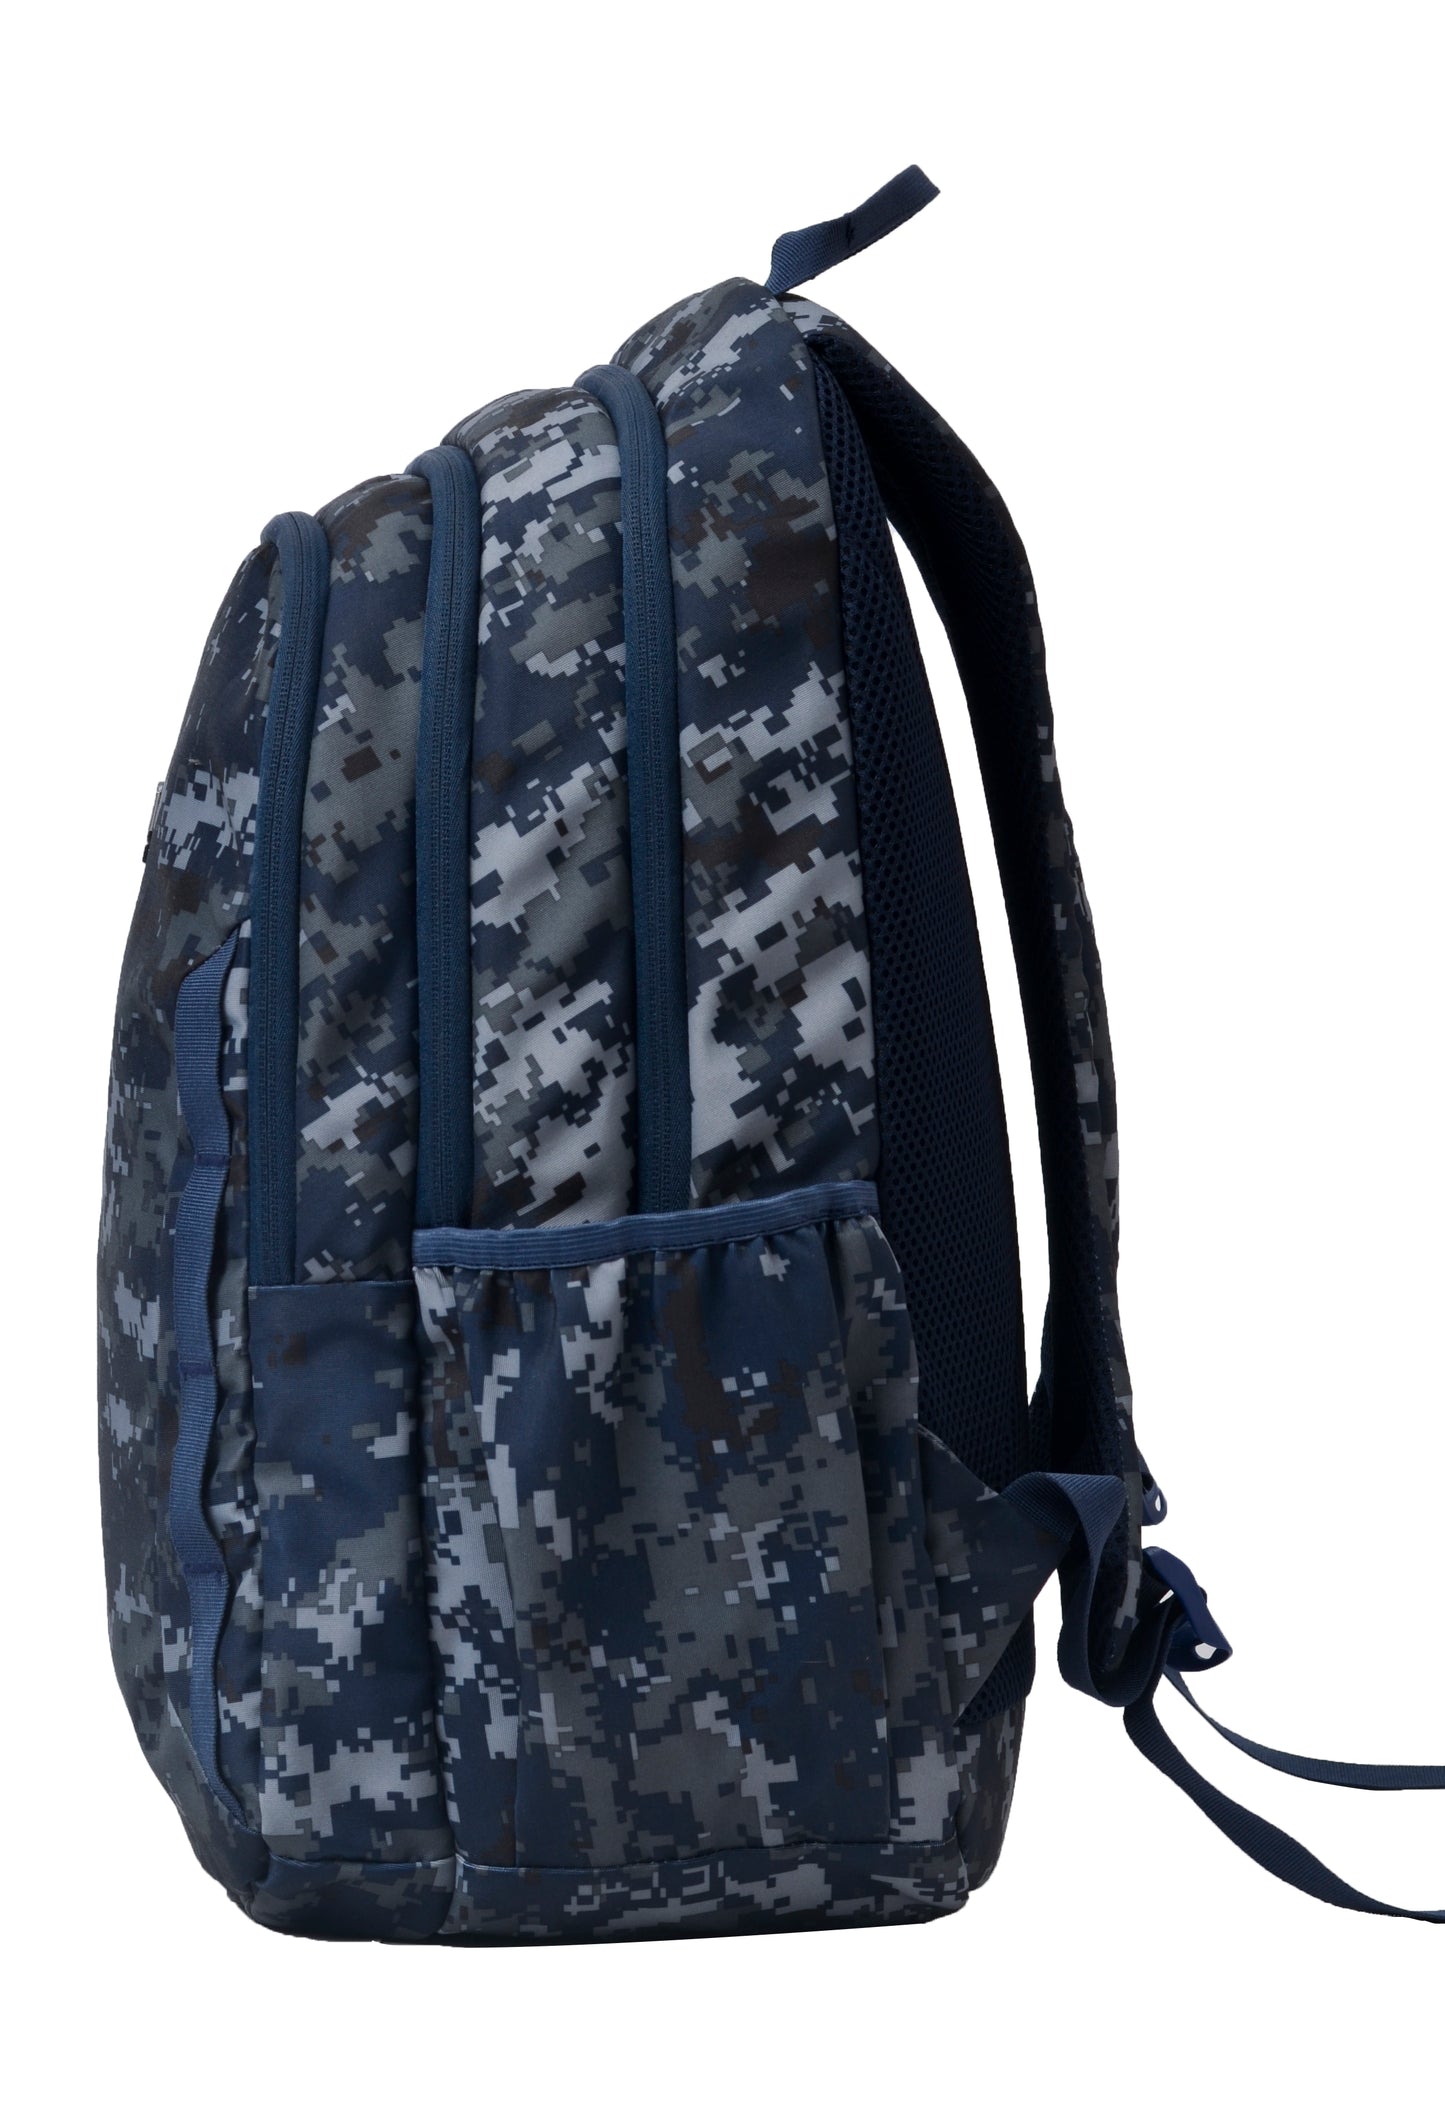 Military Raider 30L Marpat Navy Digital Camo Backpack with Rain Cover